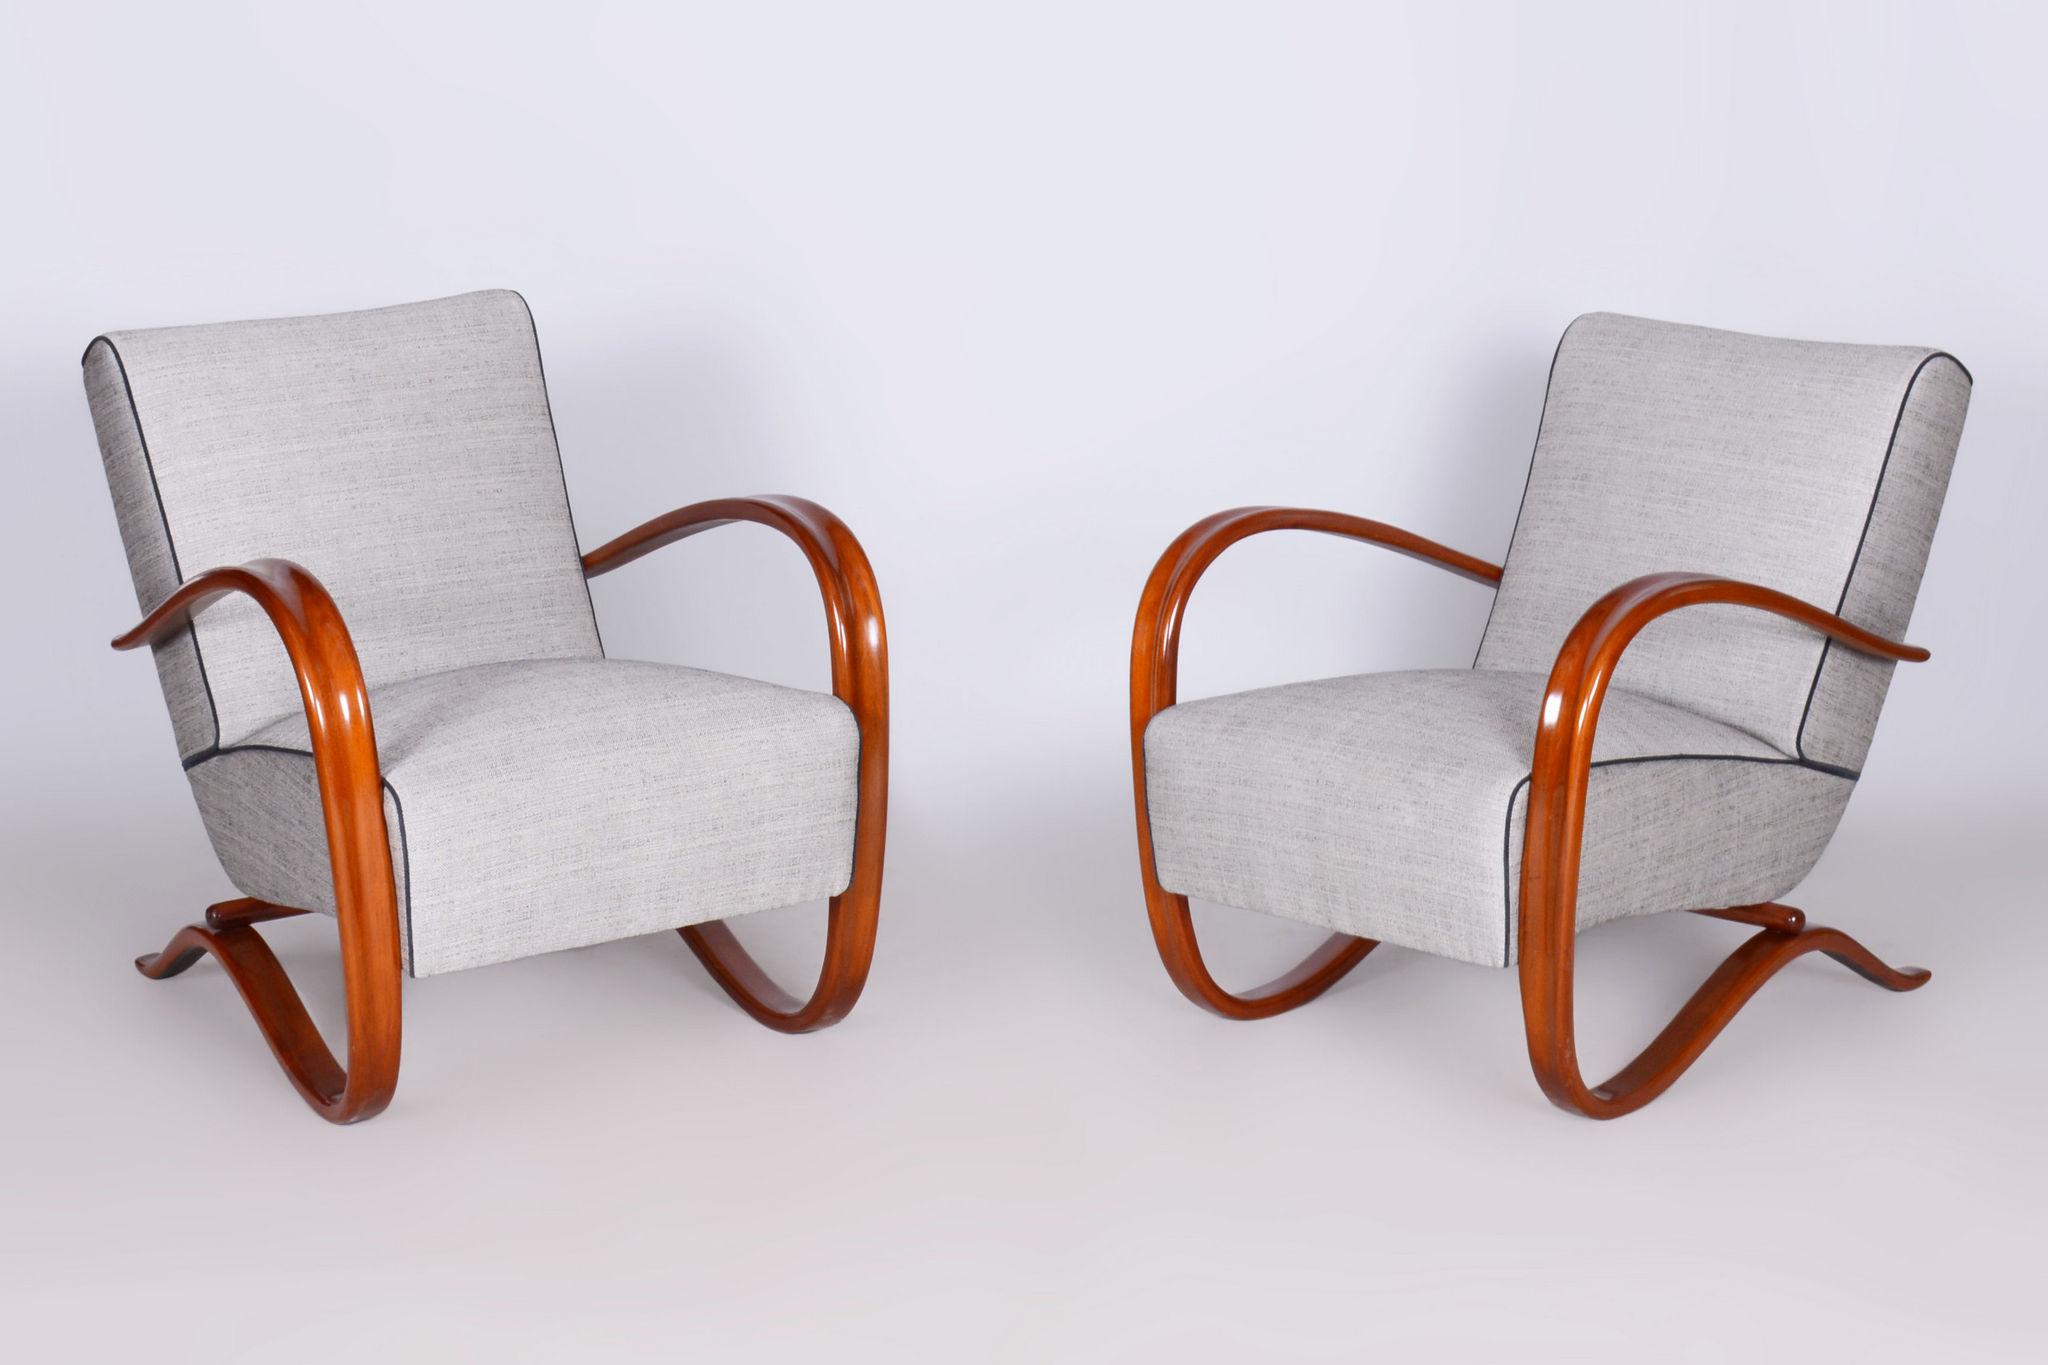 Pair of Restored H-269 Armchairs, by Jindrich Halabala, UP Zavody, Czech, 1930s For Sale 5